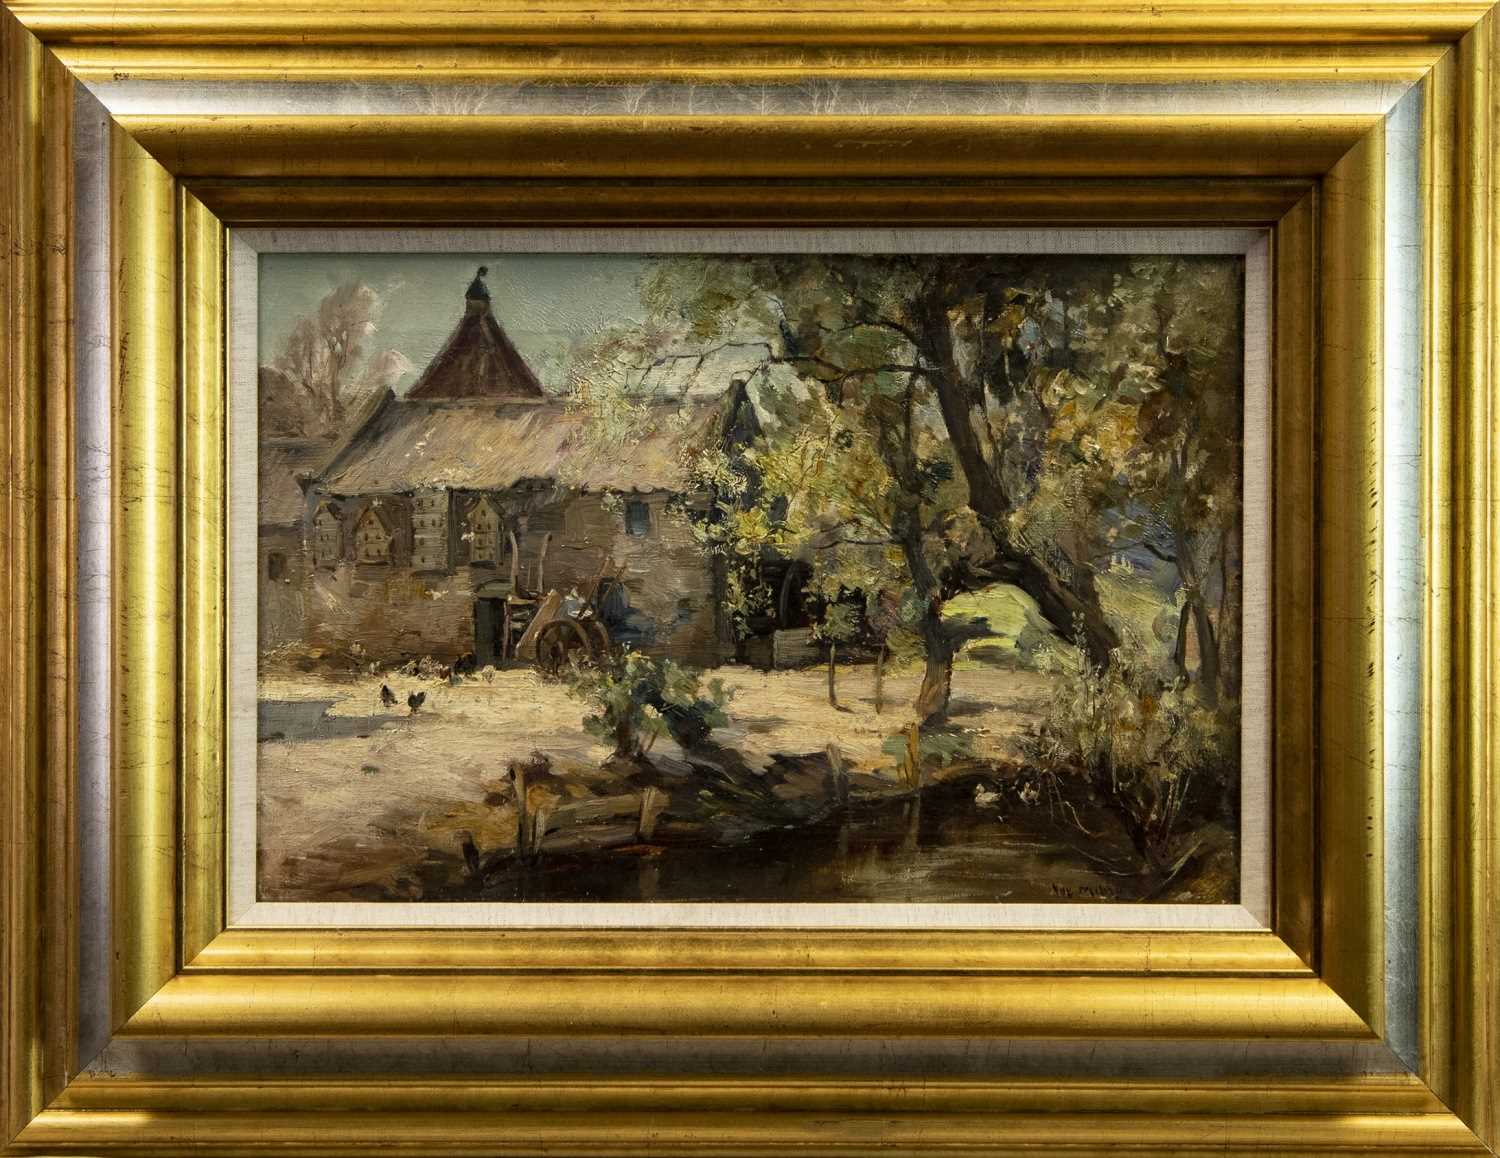 Lot 70 - THE OLD FARM BY THE RIVER, AN OIL BY JOE MILNE